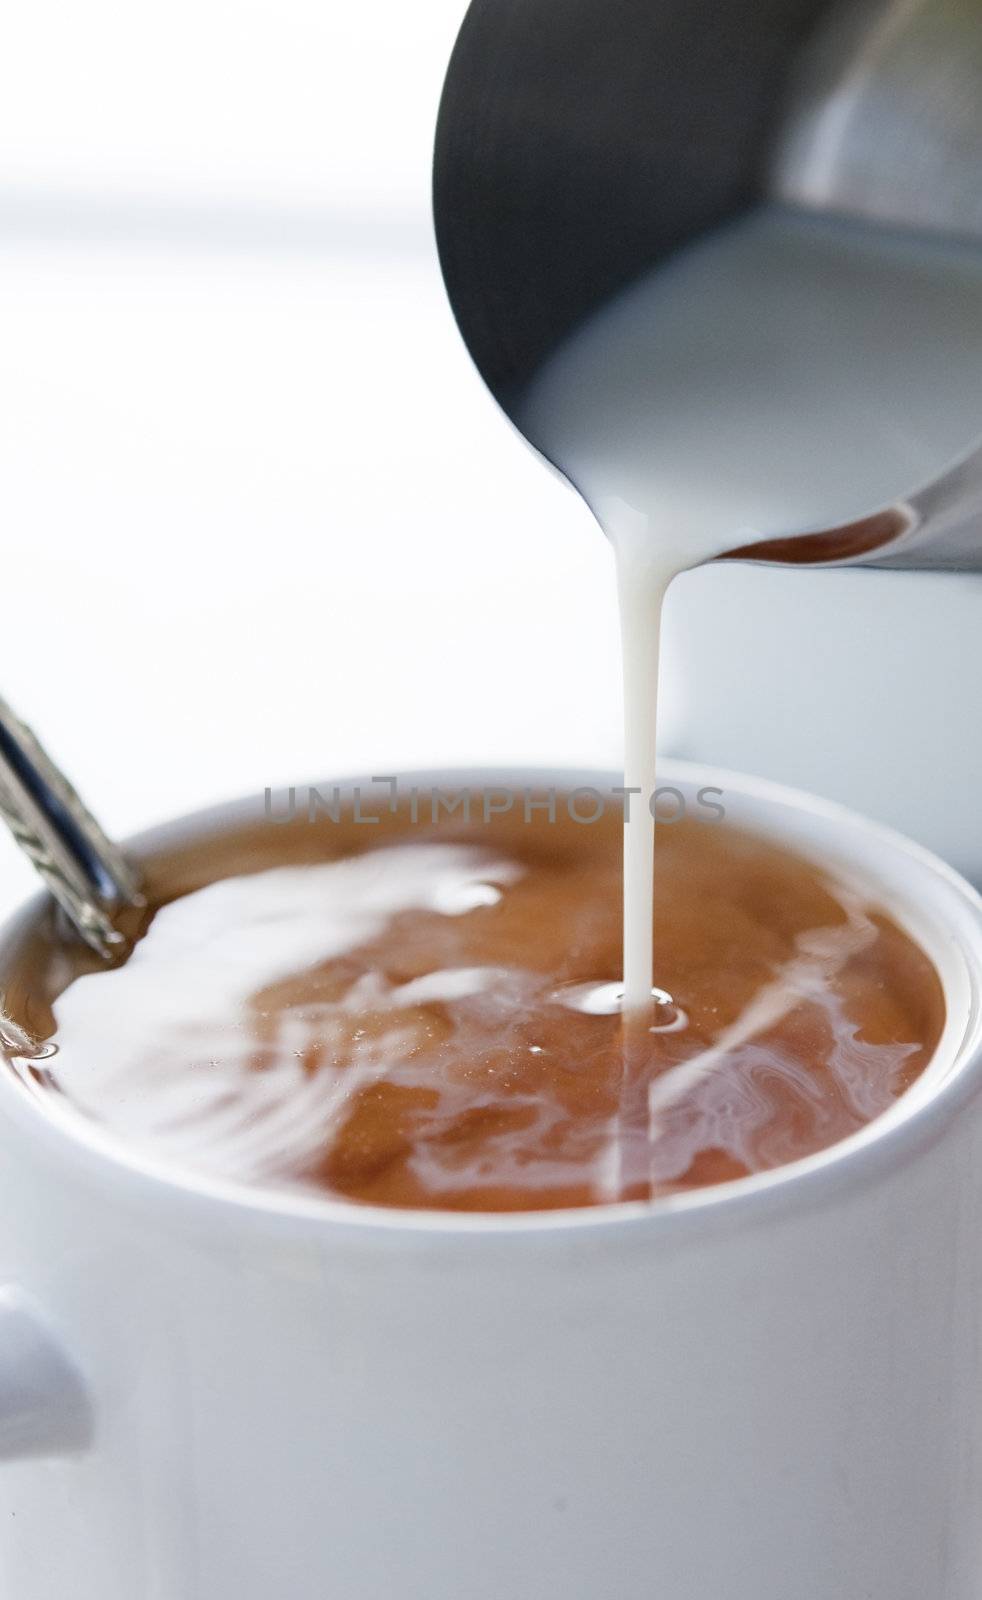  milk bring poured into a glass of tea 